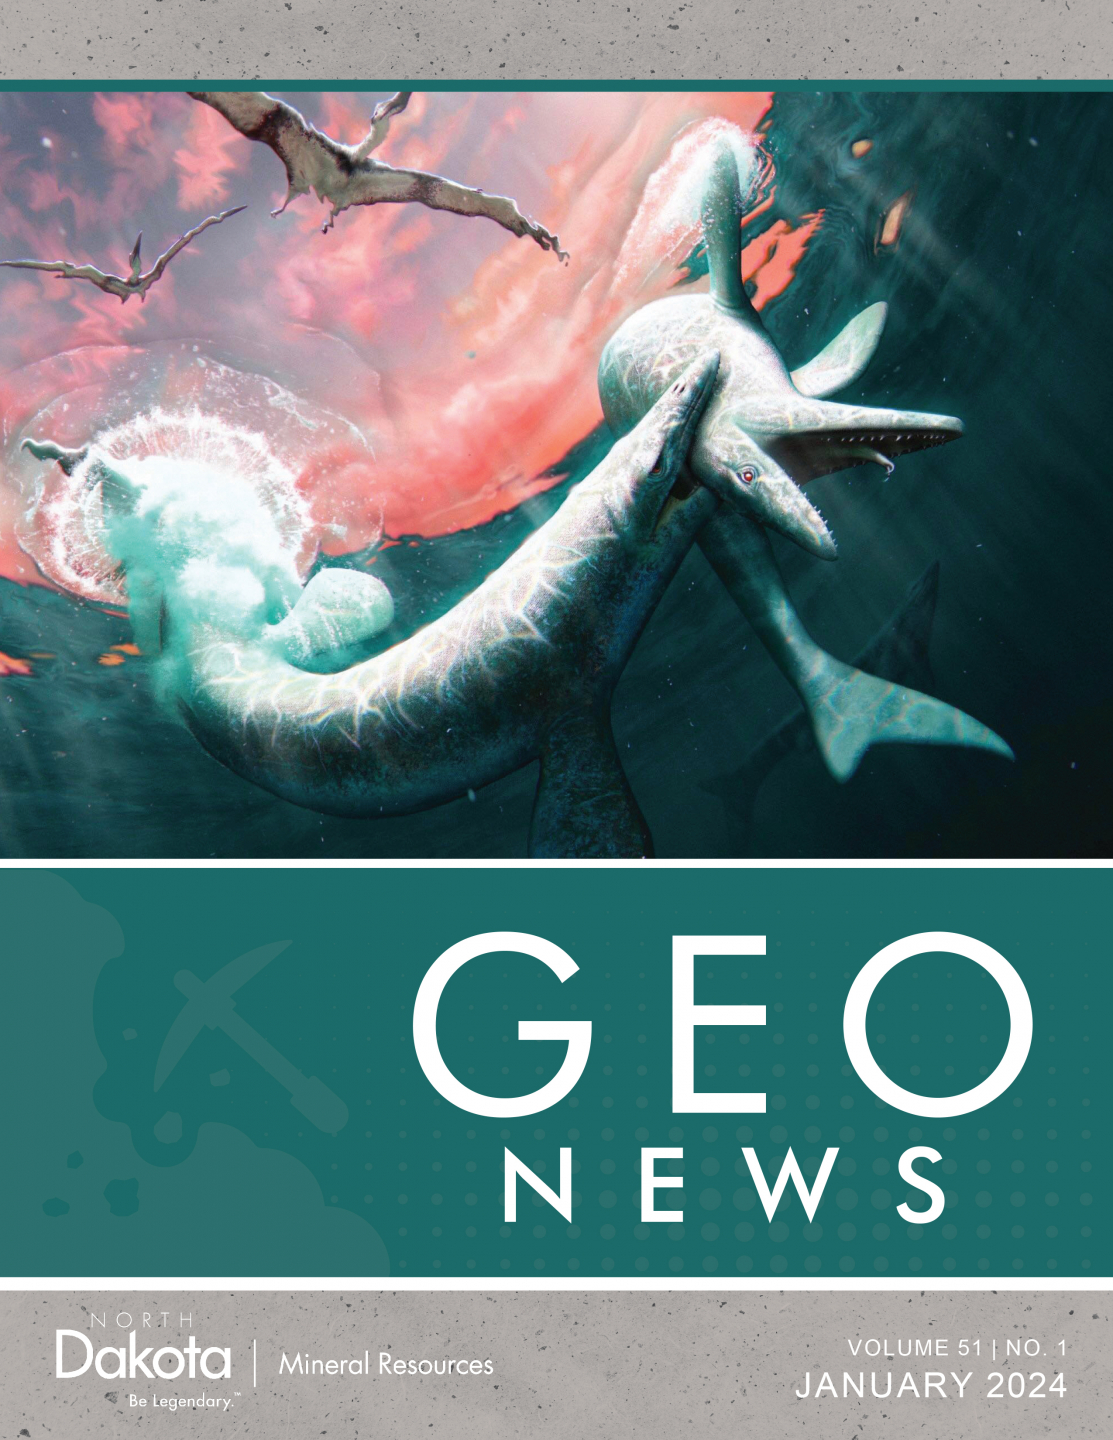 Geo News cover featuring a painting of a mosasaur.